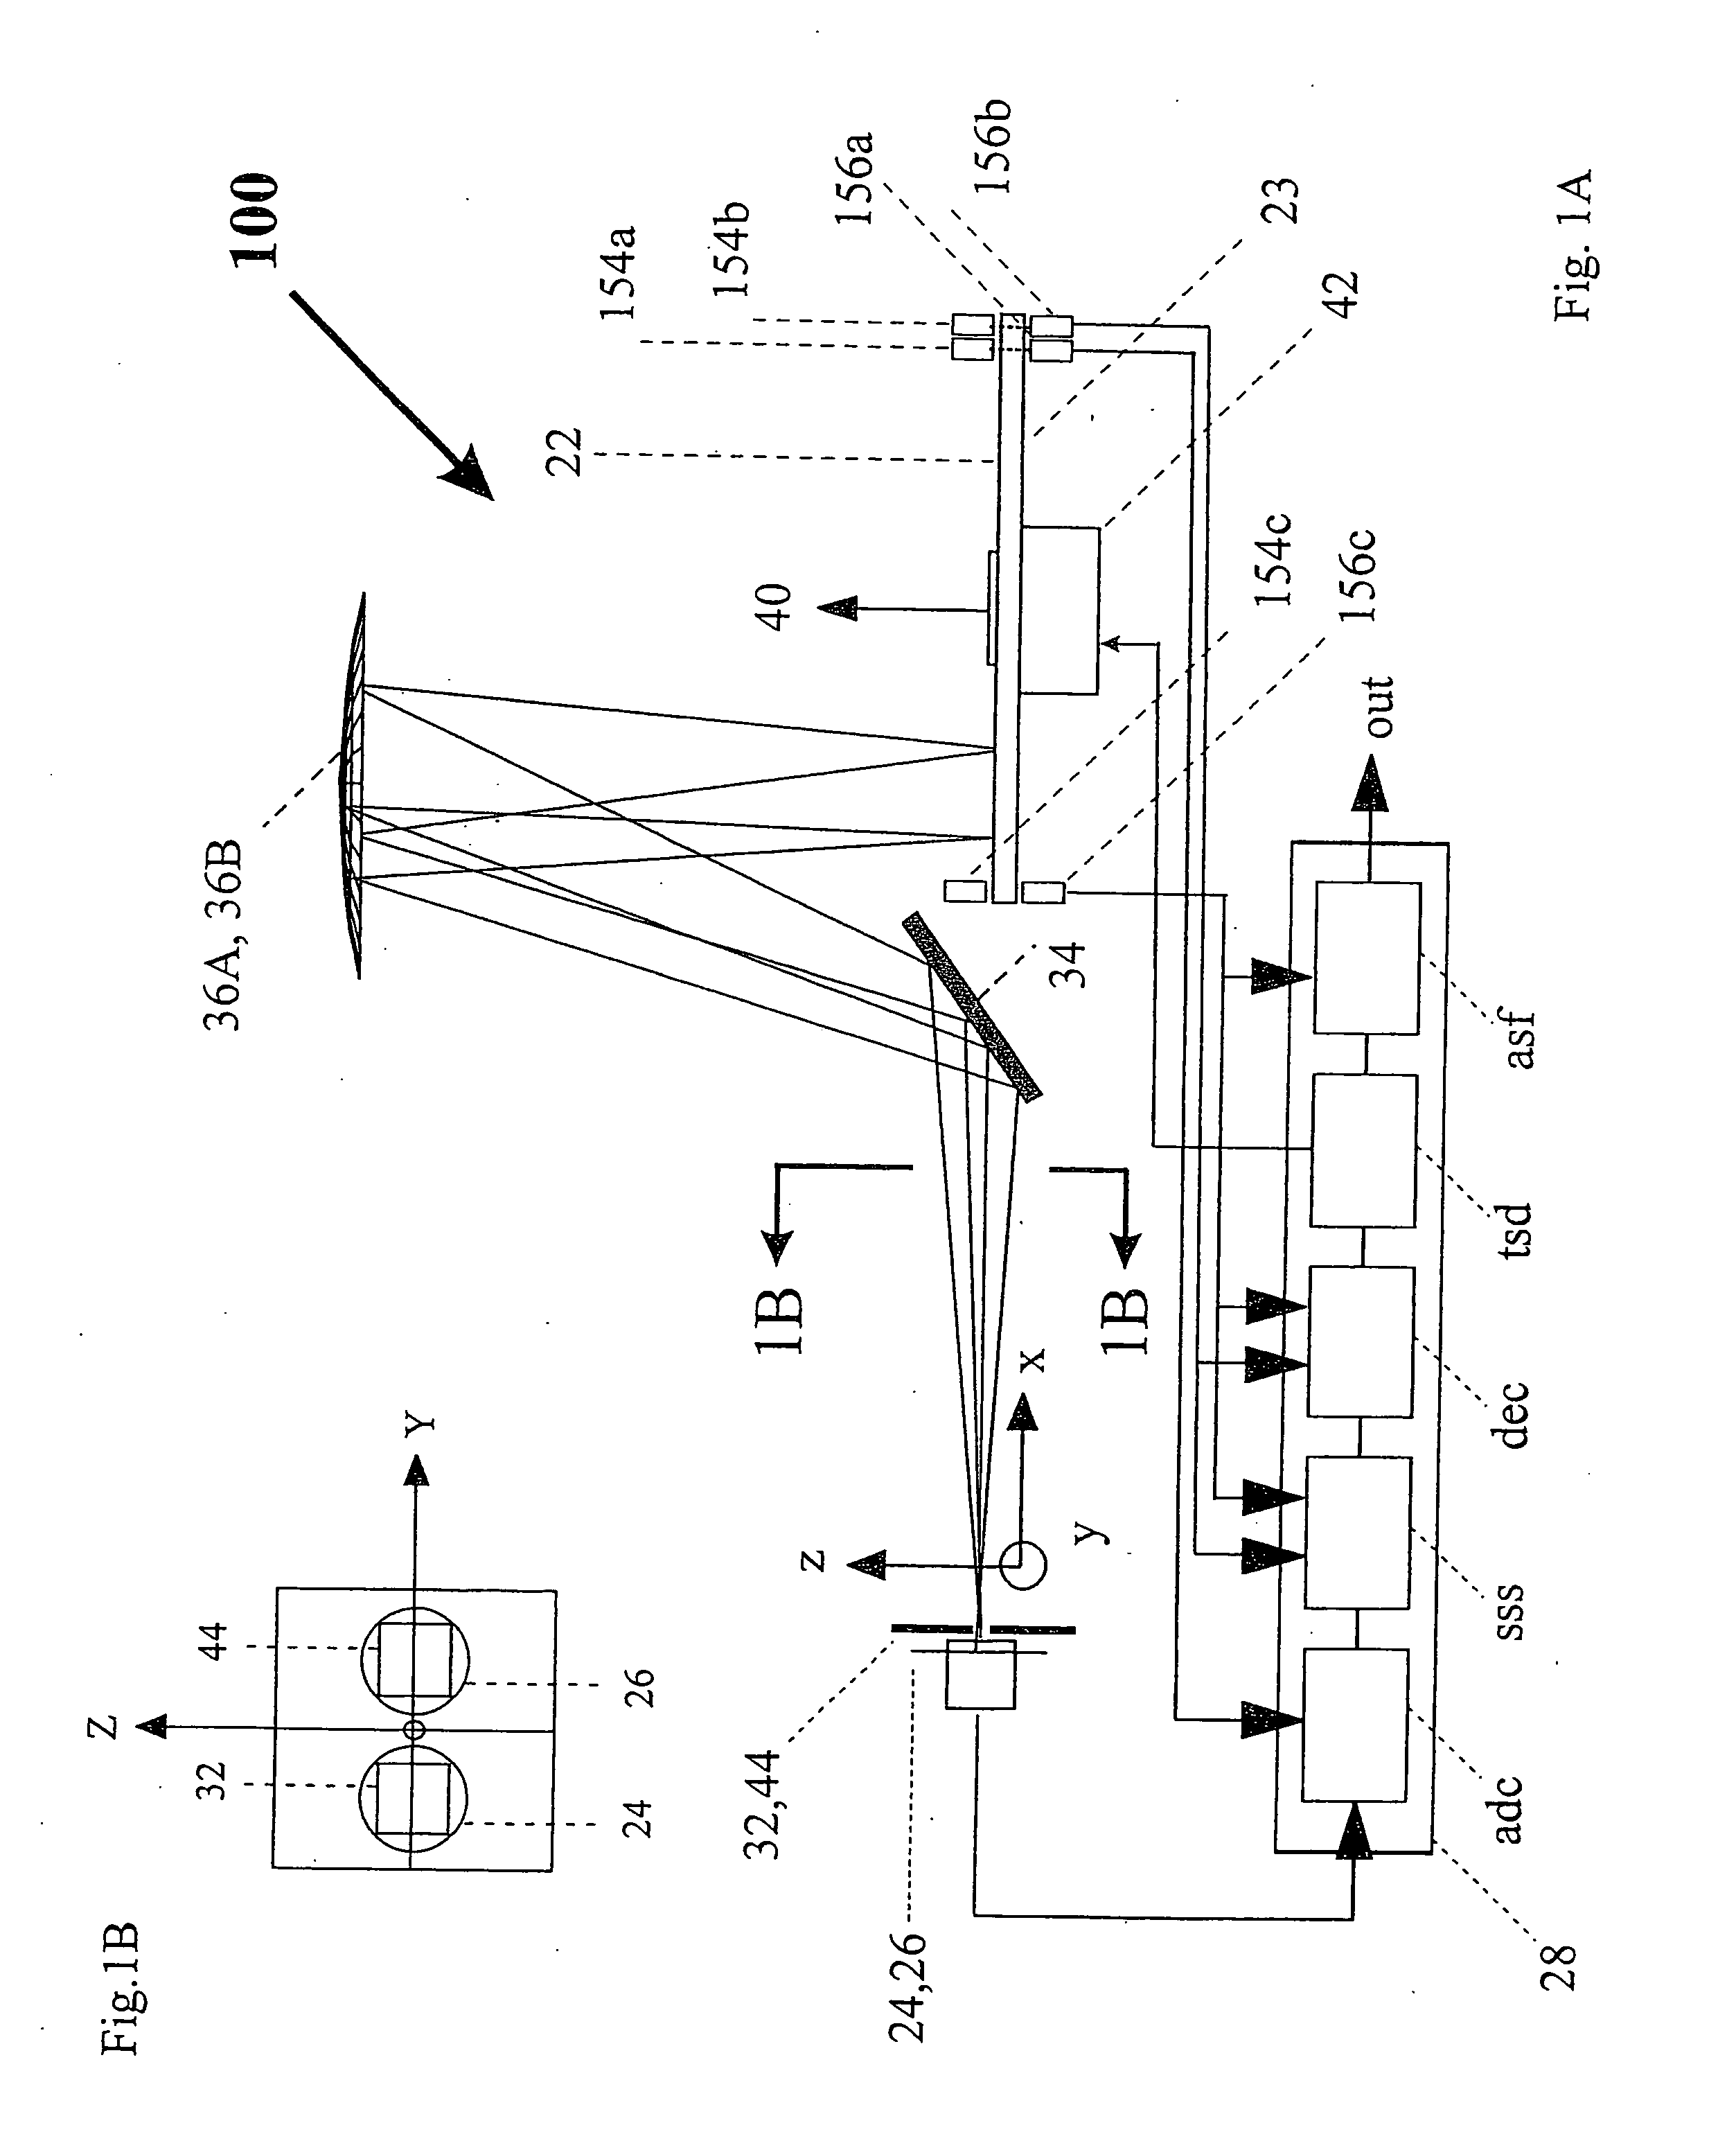 Method and apparatus for radiation analysis and encoder